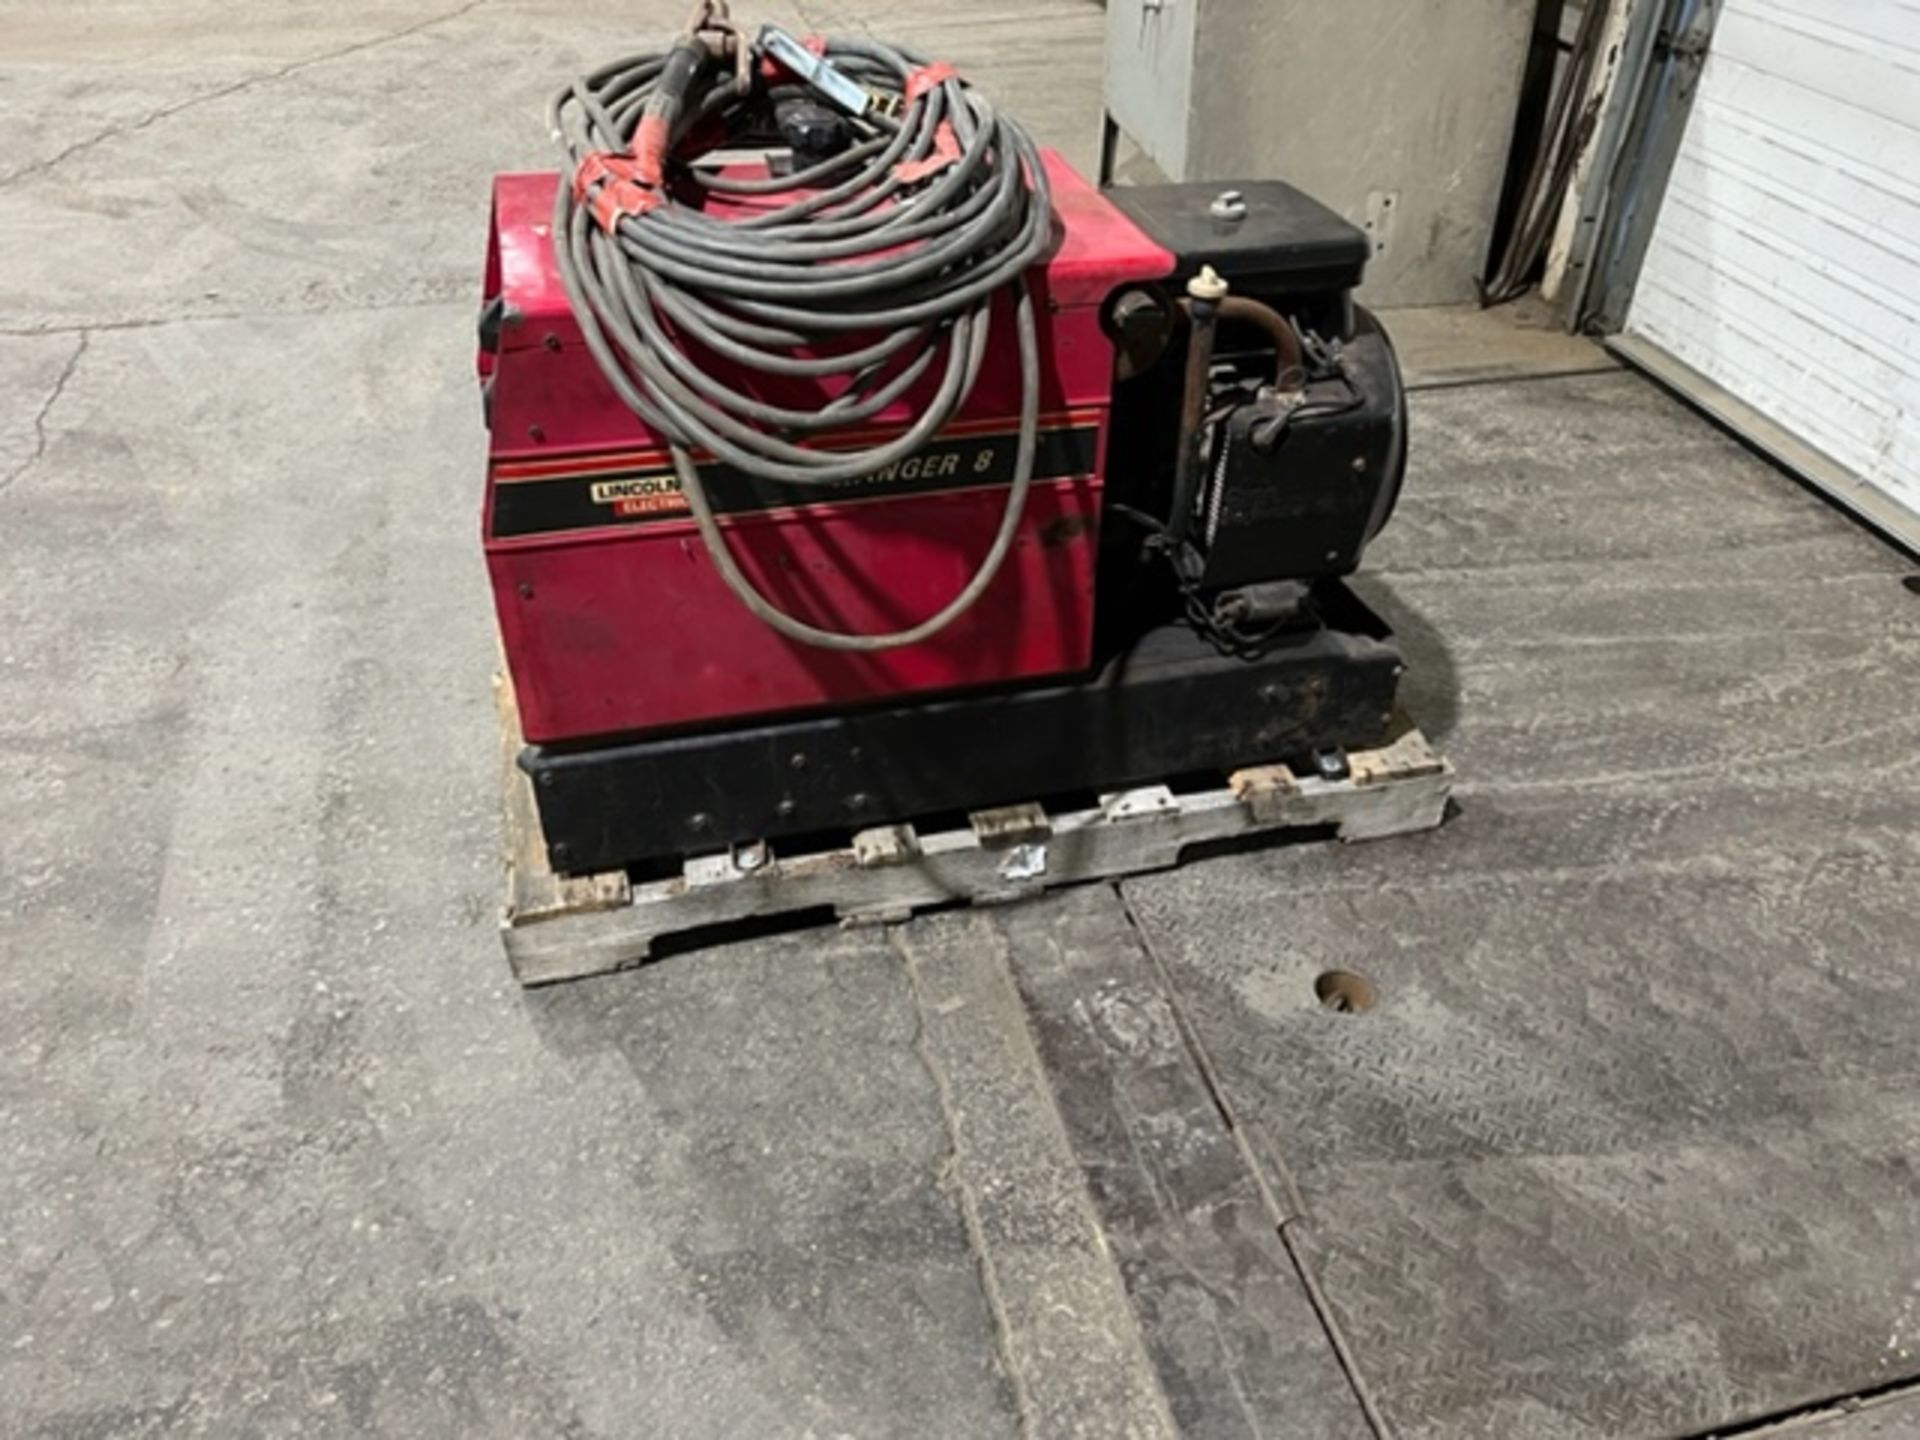 Lincoln Ranger 8 Portable Gas Welder / Generator - portable unit with Cables - Image 3 of 4